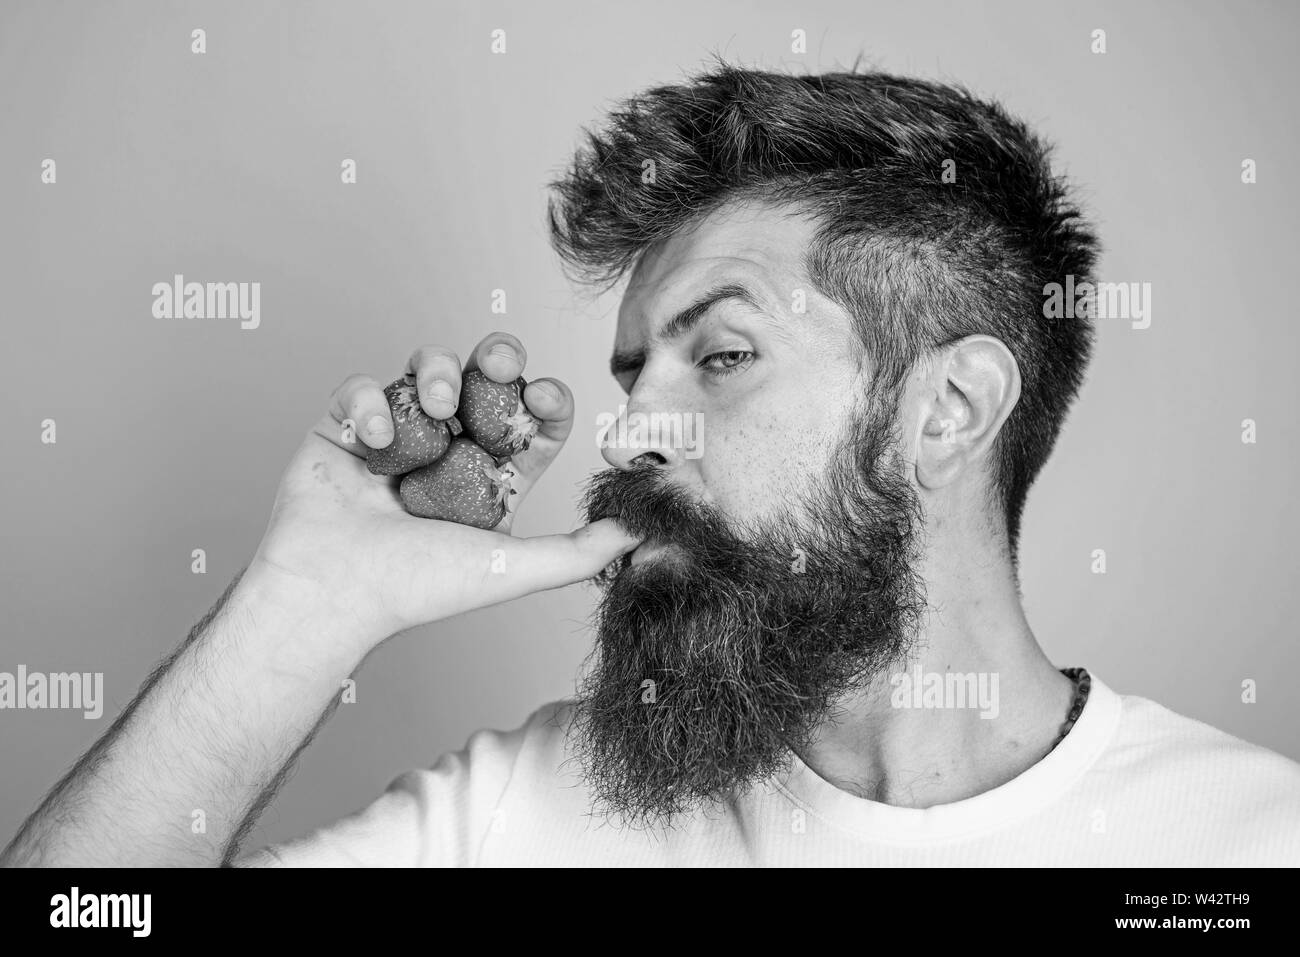 Hipster bearded holds strawberries fist as juice bottle. Man strict face enjoy fresh drink strawberry juice. Fresh juice concept. Man drinks strawberry juice suck thumb as drink straw blue background. Stock Photo